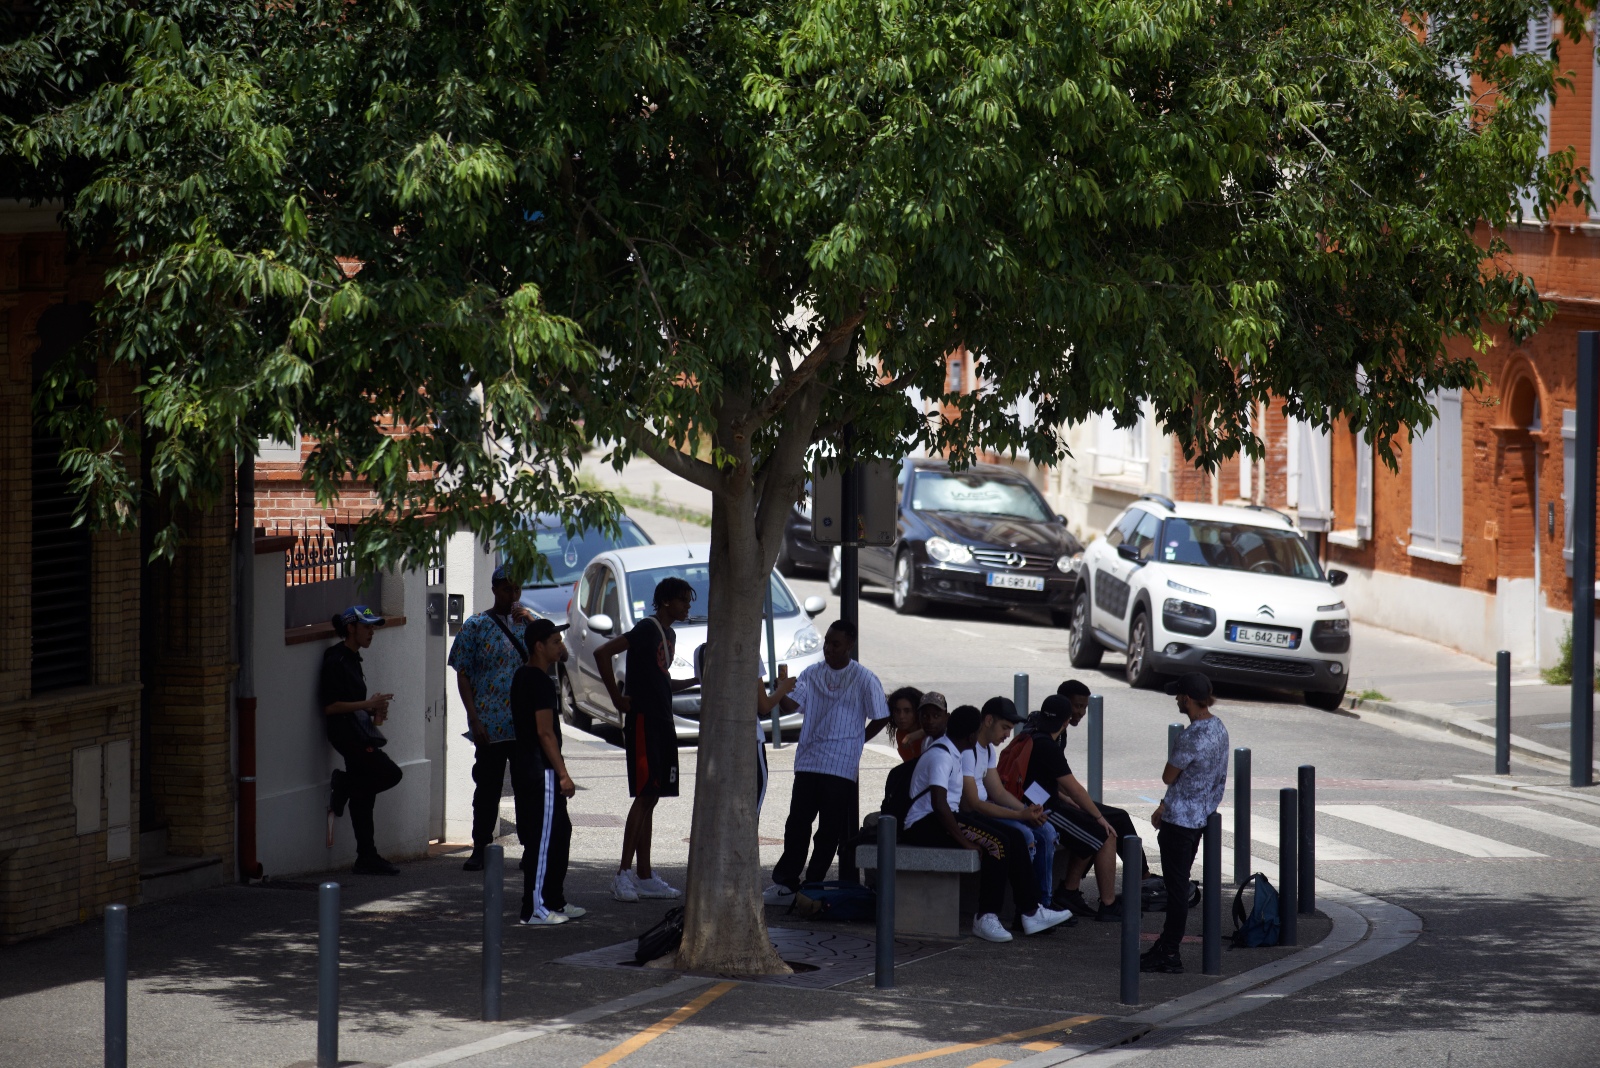 A group of young people sits in the shade of a tree on a bright and sunny street.